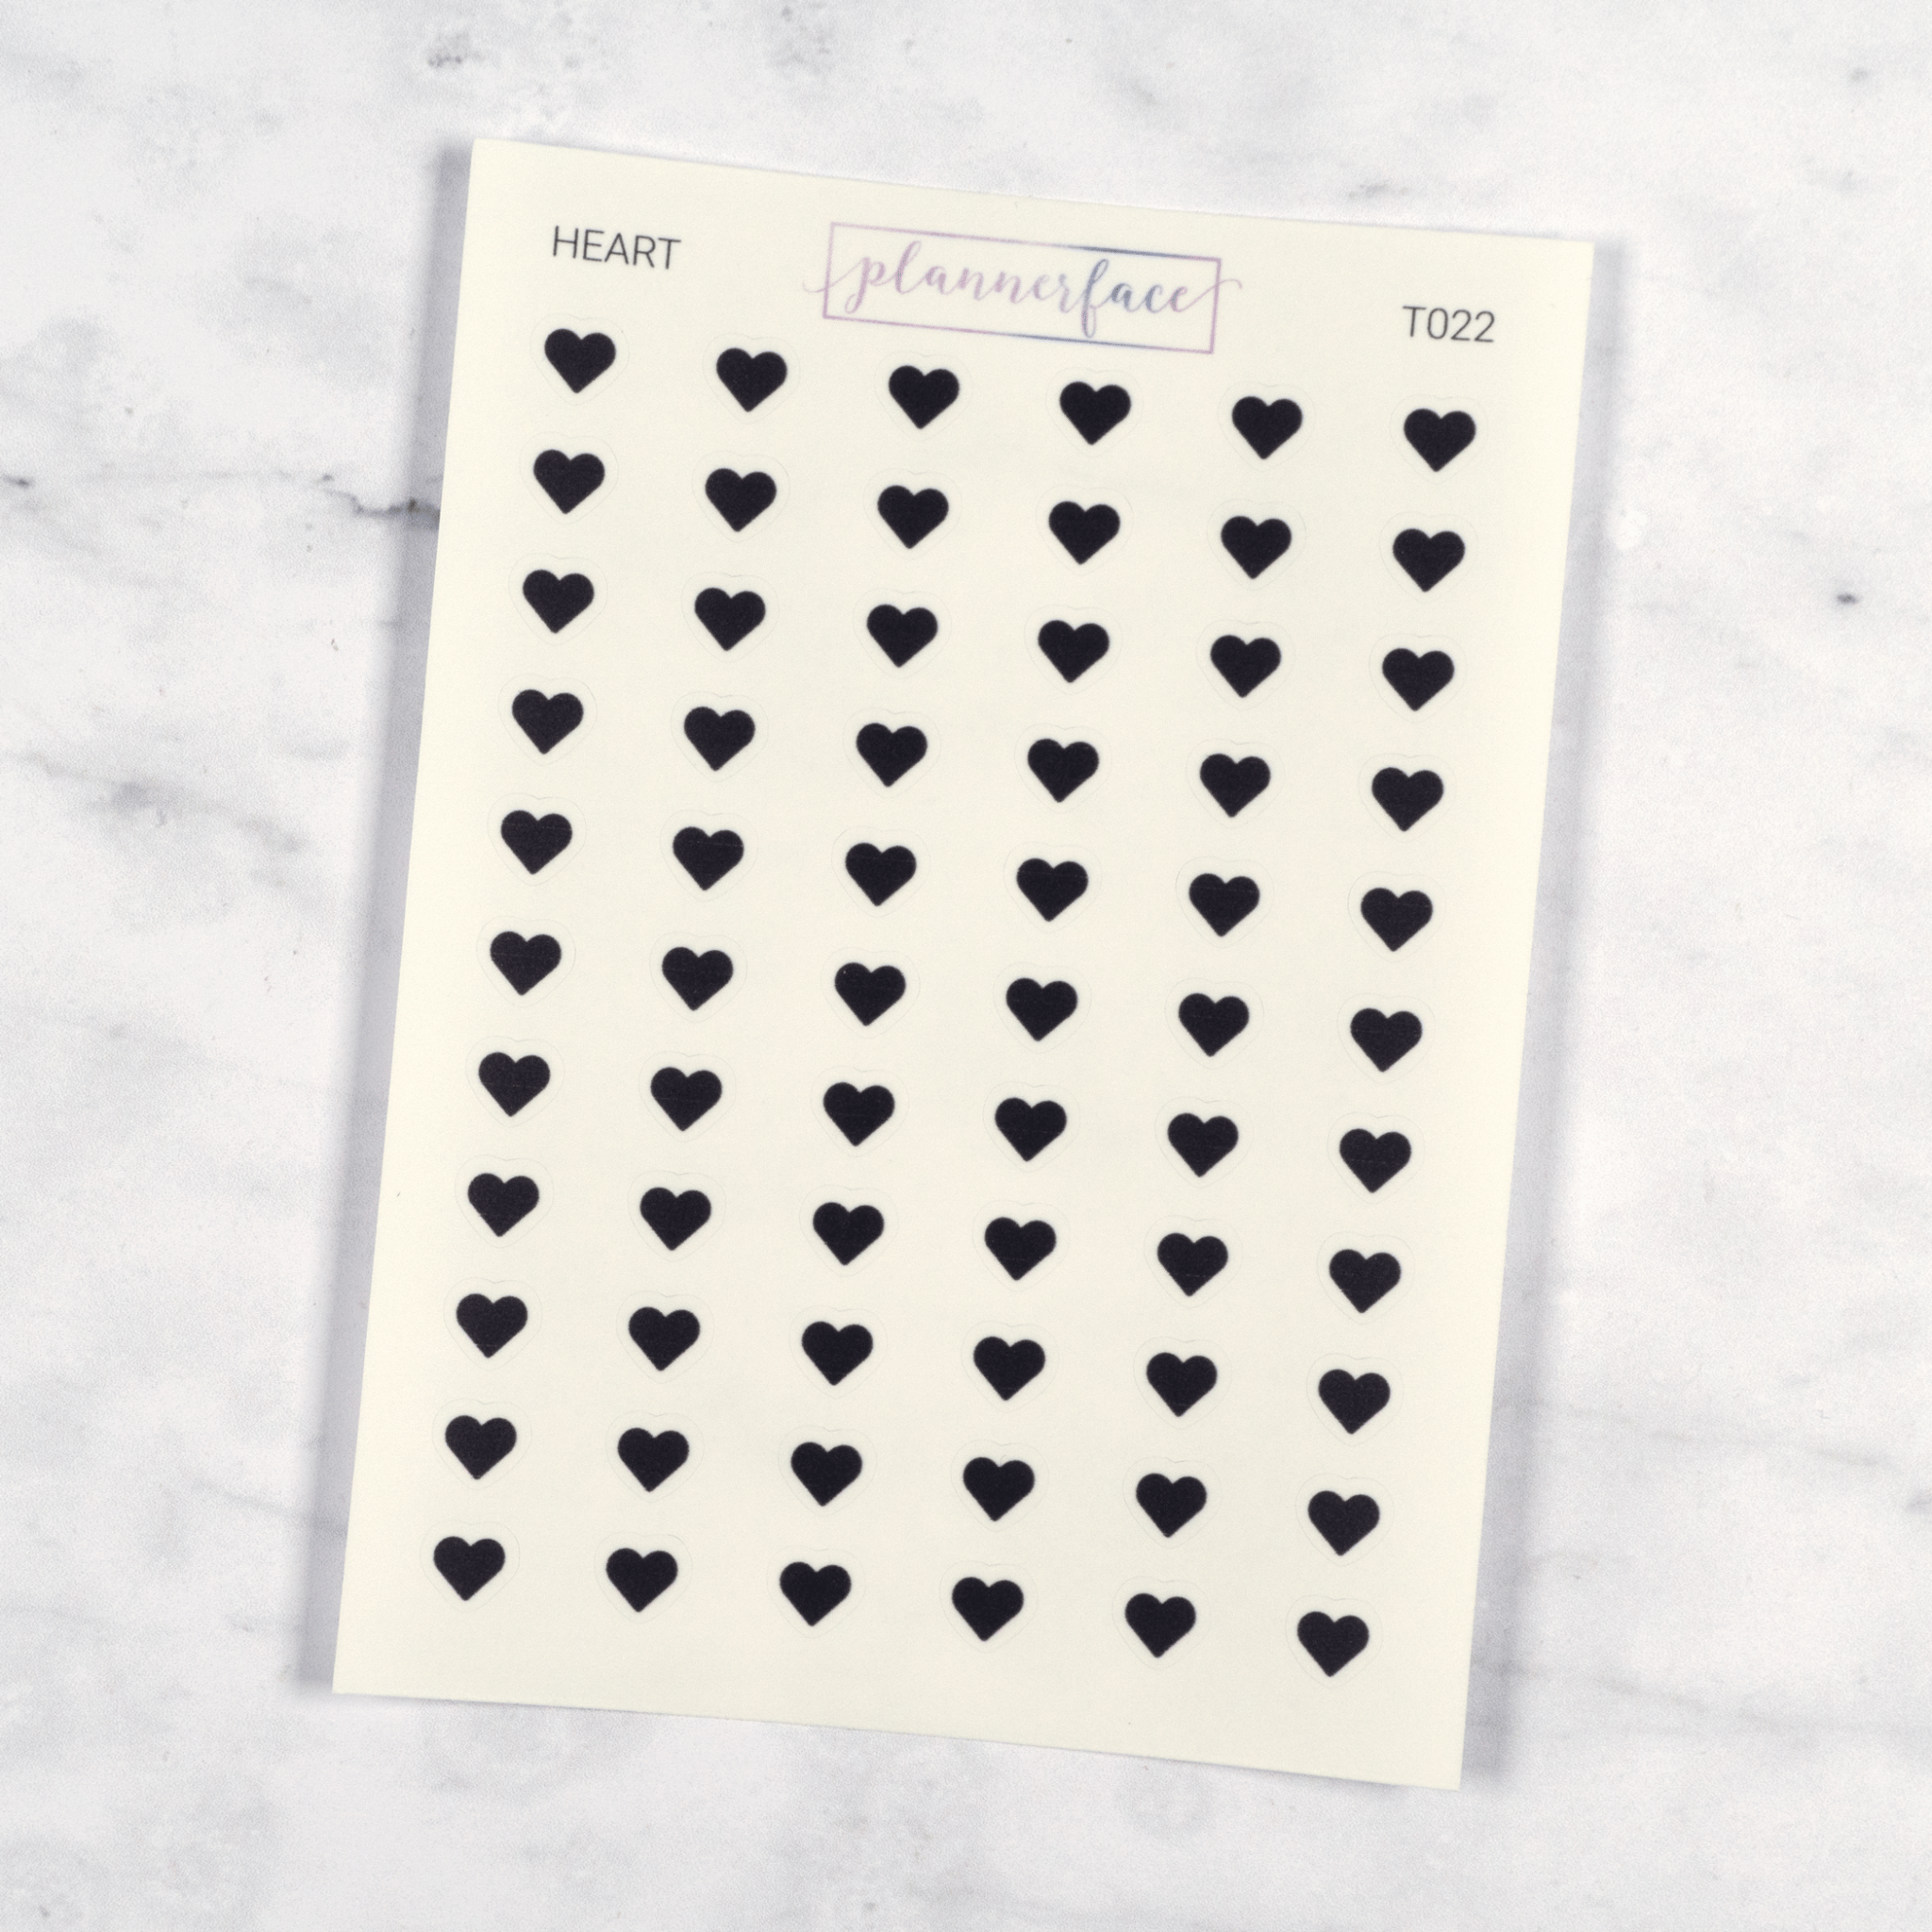 Heart Transparent Icon Stickers by Plannerface